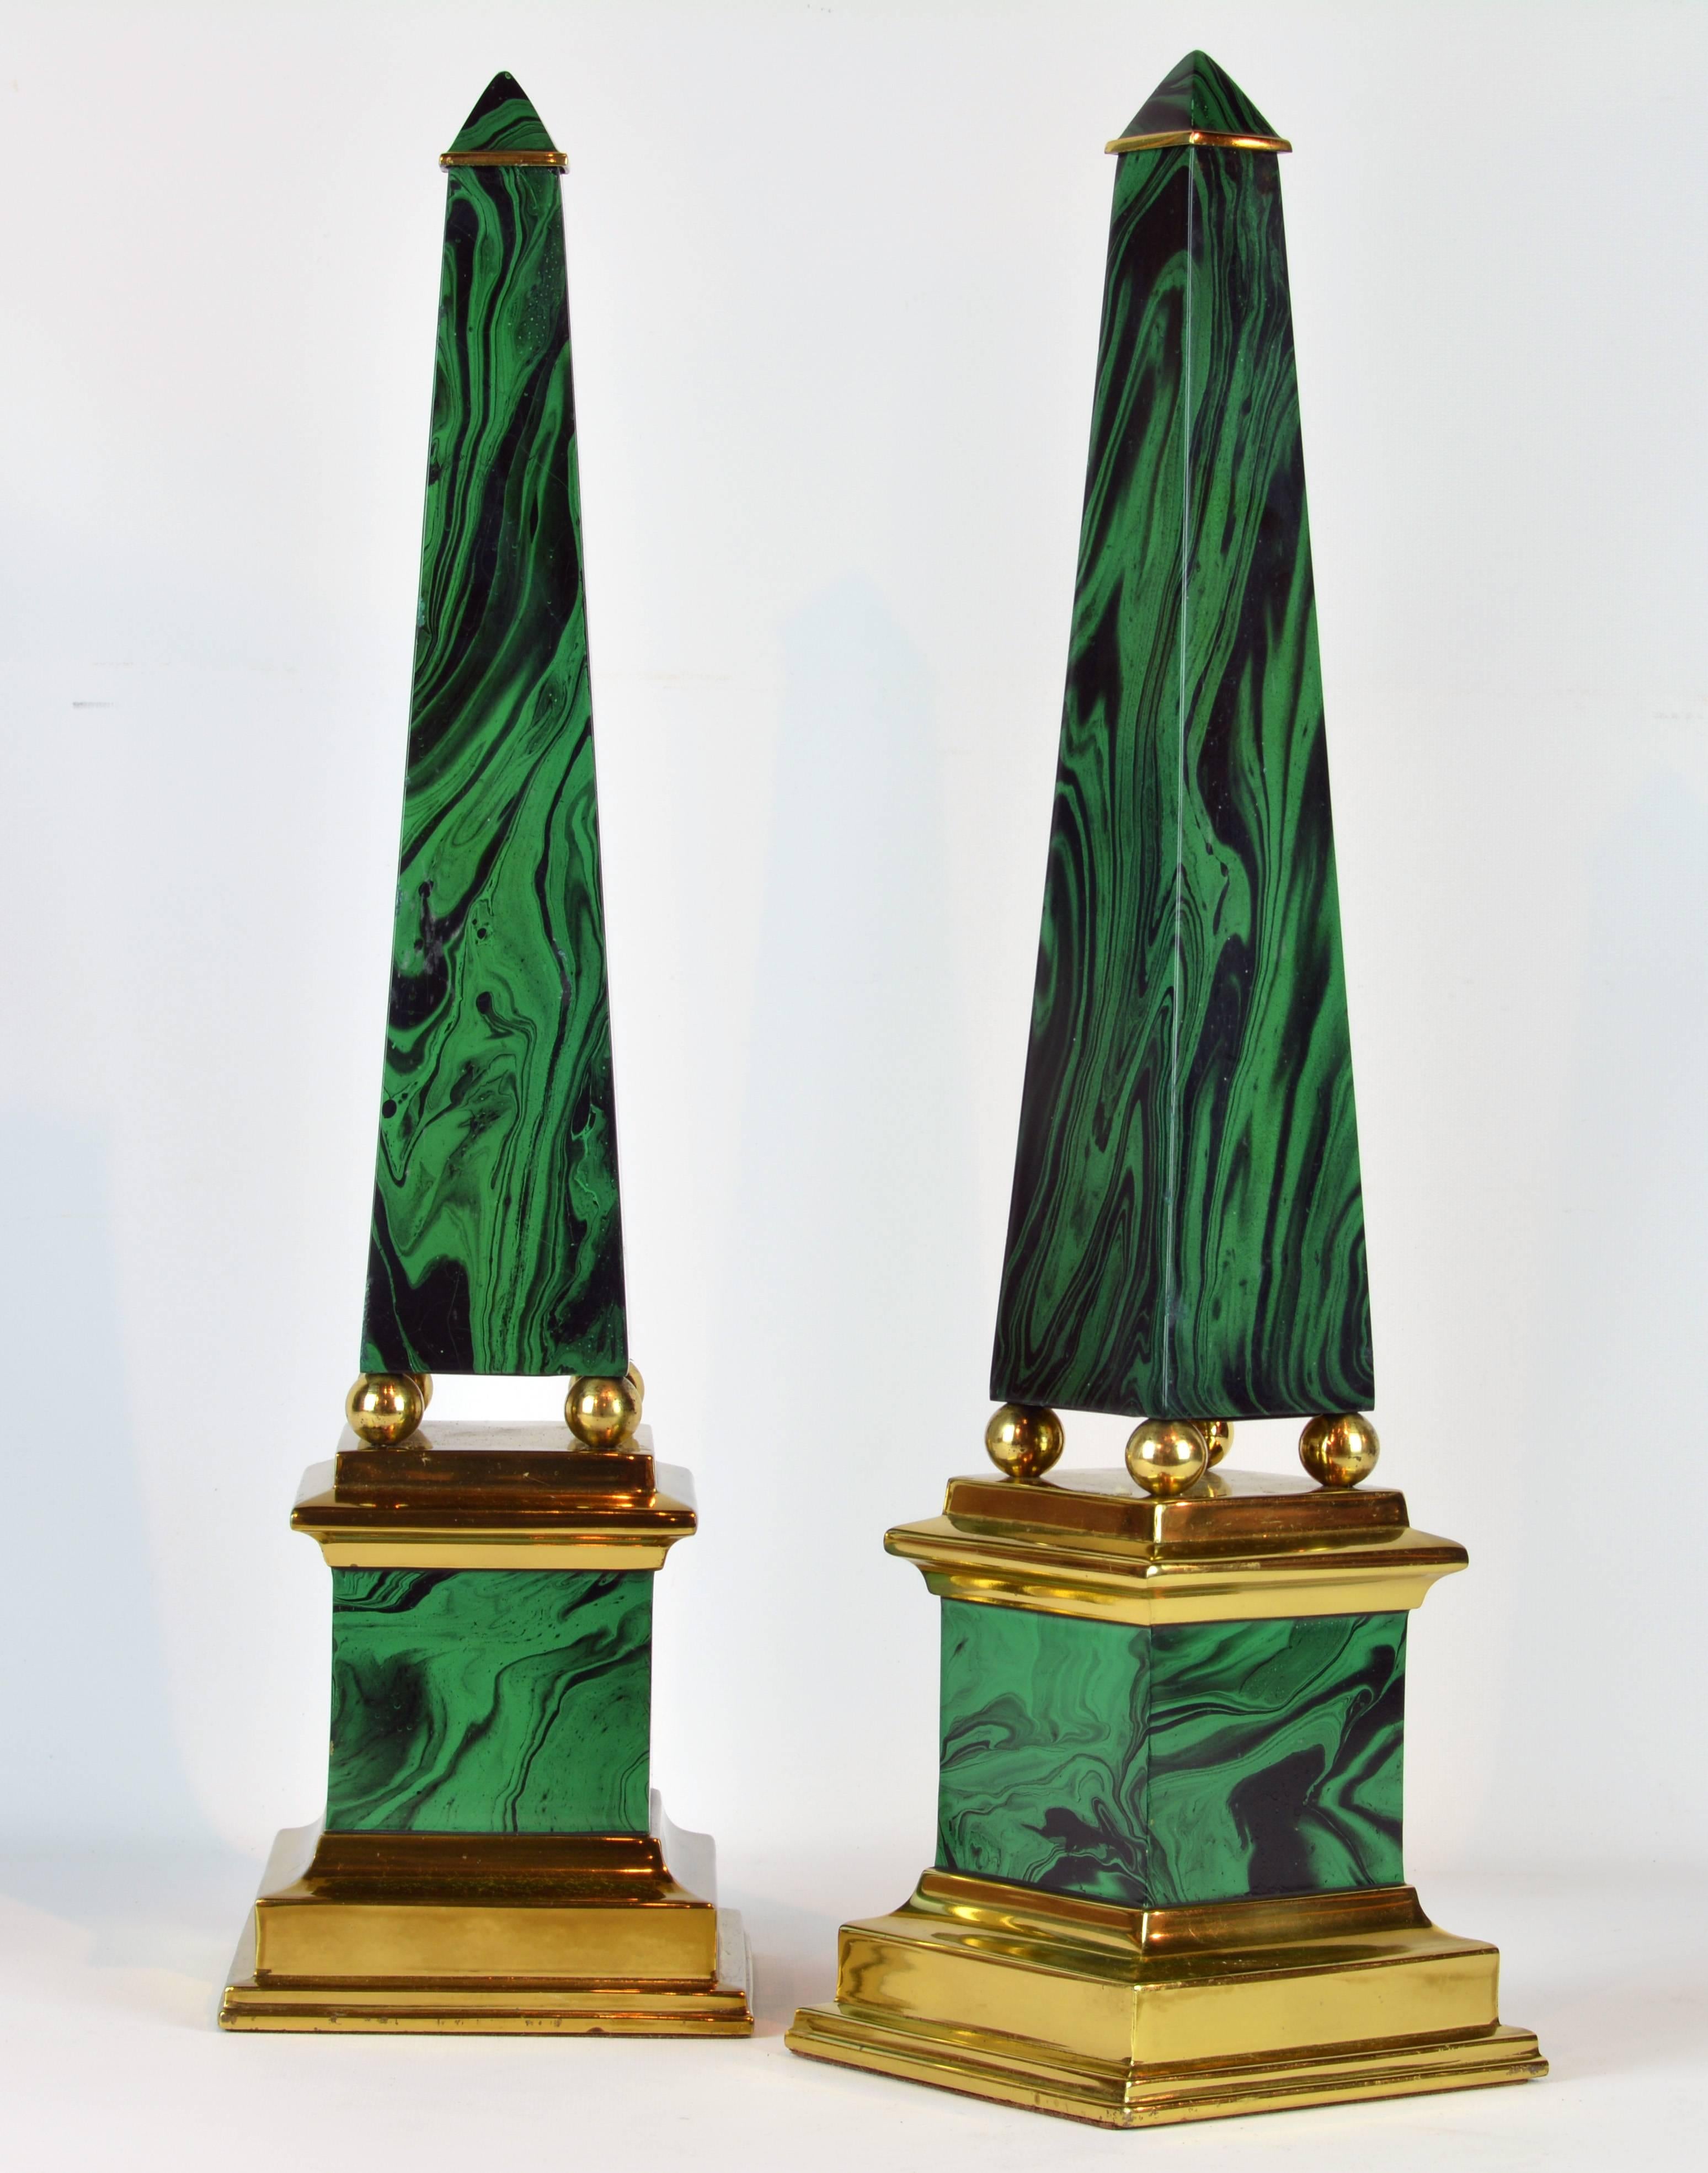 Standing almost 22 inches tall this beautifully crafted pair of obelisk models in the neoclassical style feature faux malachite enameled surfaces intersected by polished brass elements on the top, between shaft and bases and as stepped foot bases.